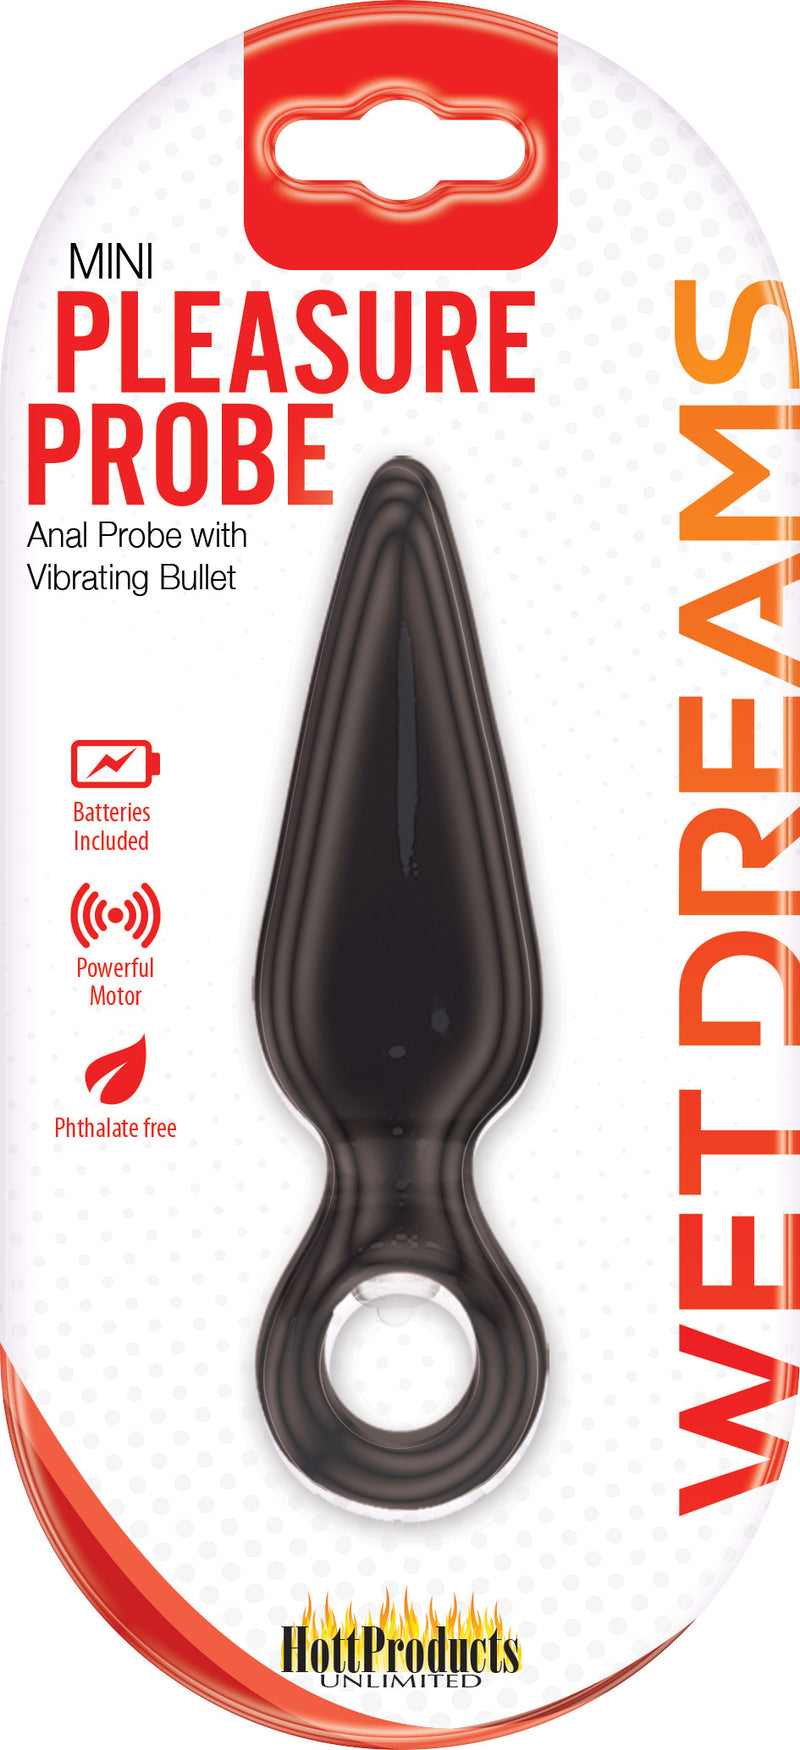 Silicone Anal Probe with Powerful Vibrations for Maximum Pleasure and Comfort - Phthalate-Free and Waterproof